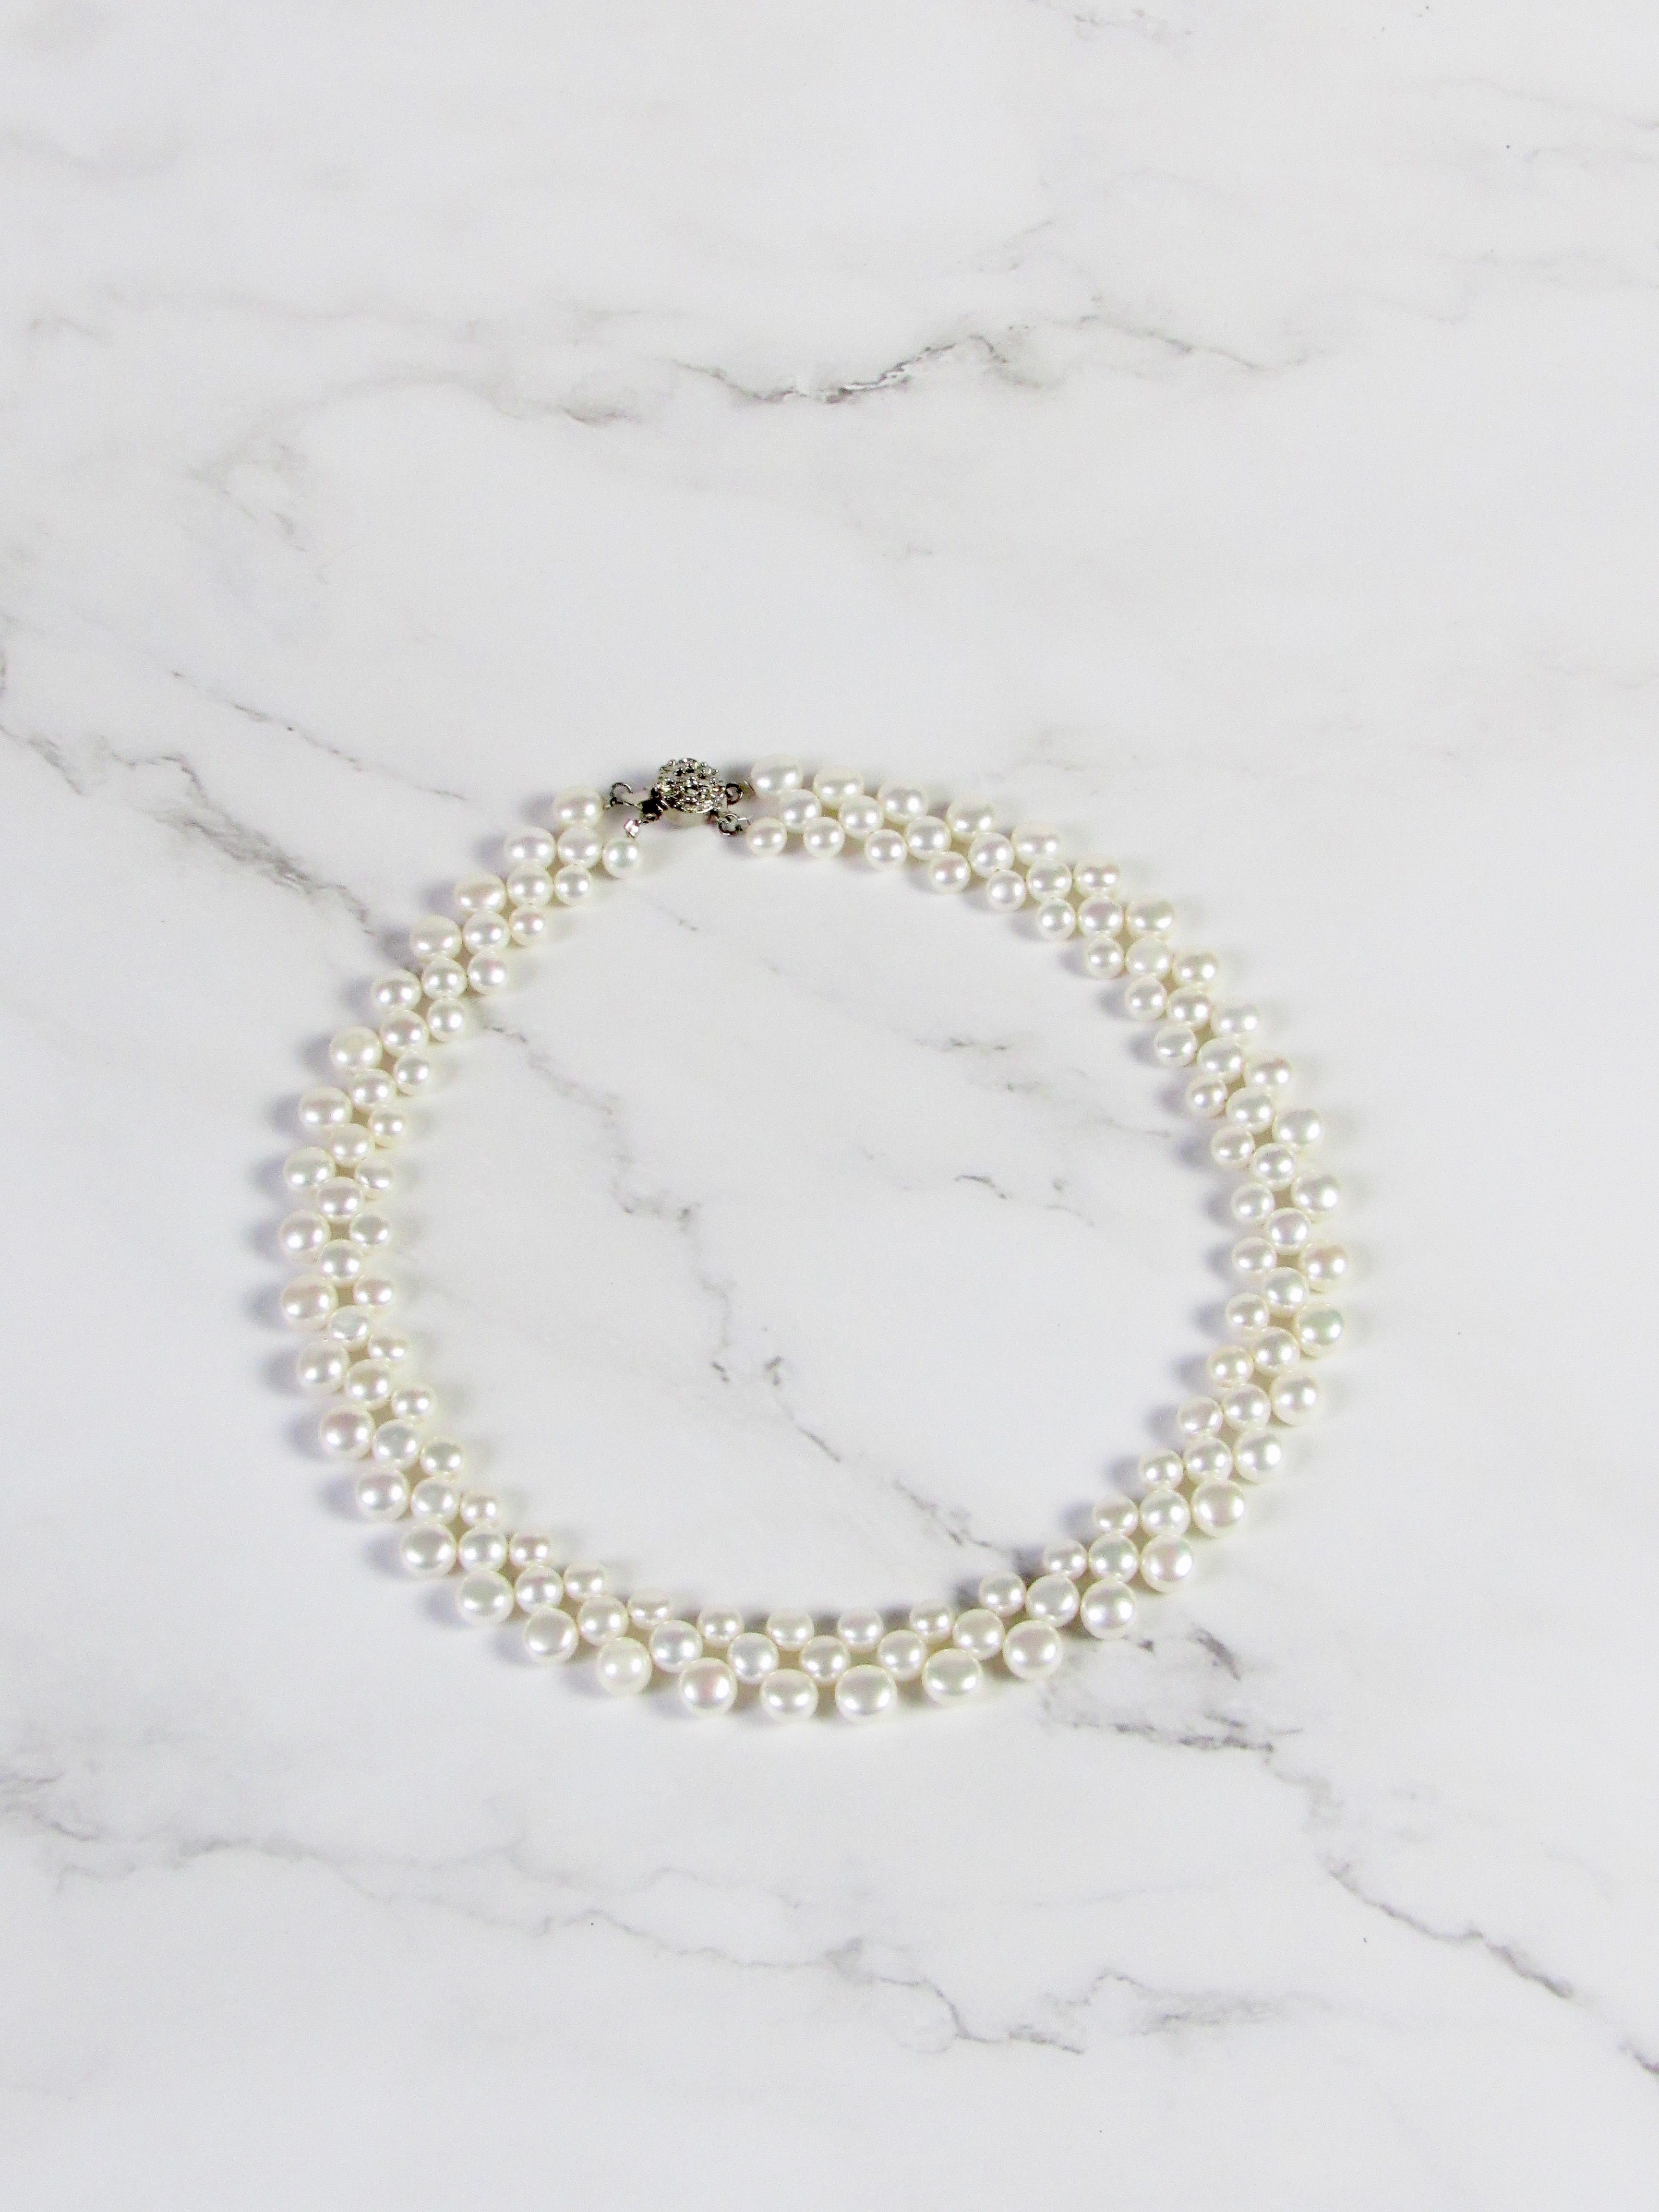 Genuine Freshwater Pearl Necklace